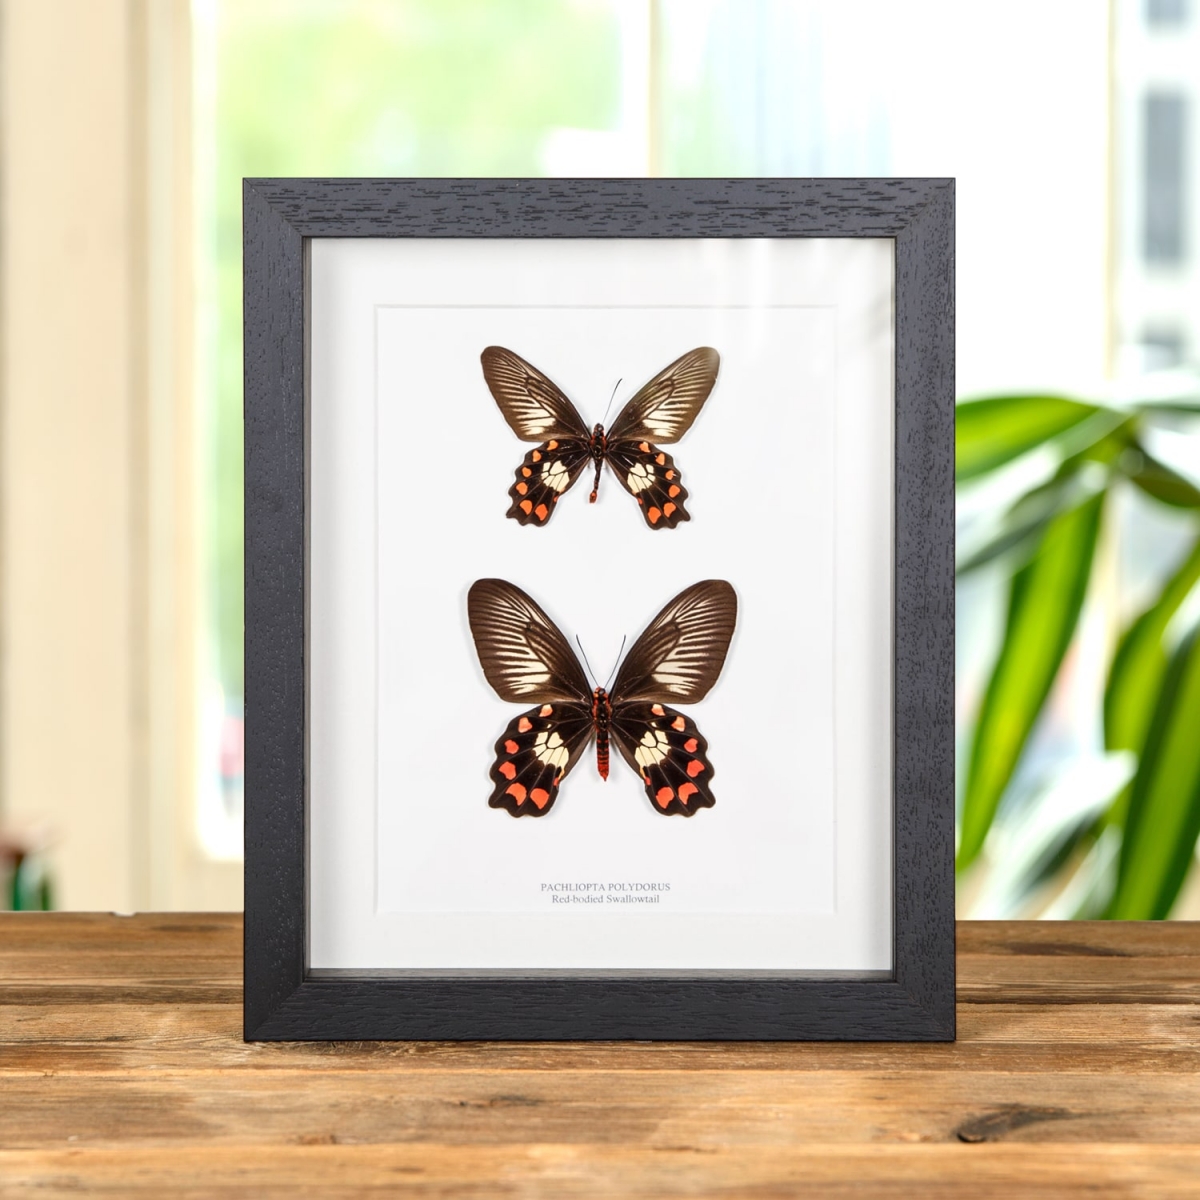 Minibeast Red-bodied Swallowtail Butterfly Male & Female In Box Frame (Pachliopta polydorus)